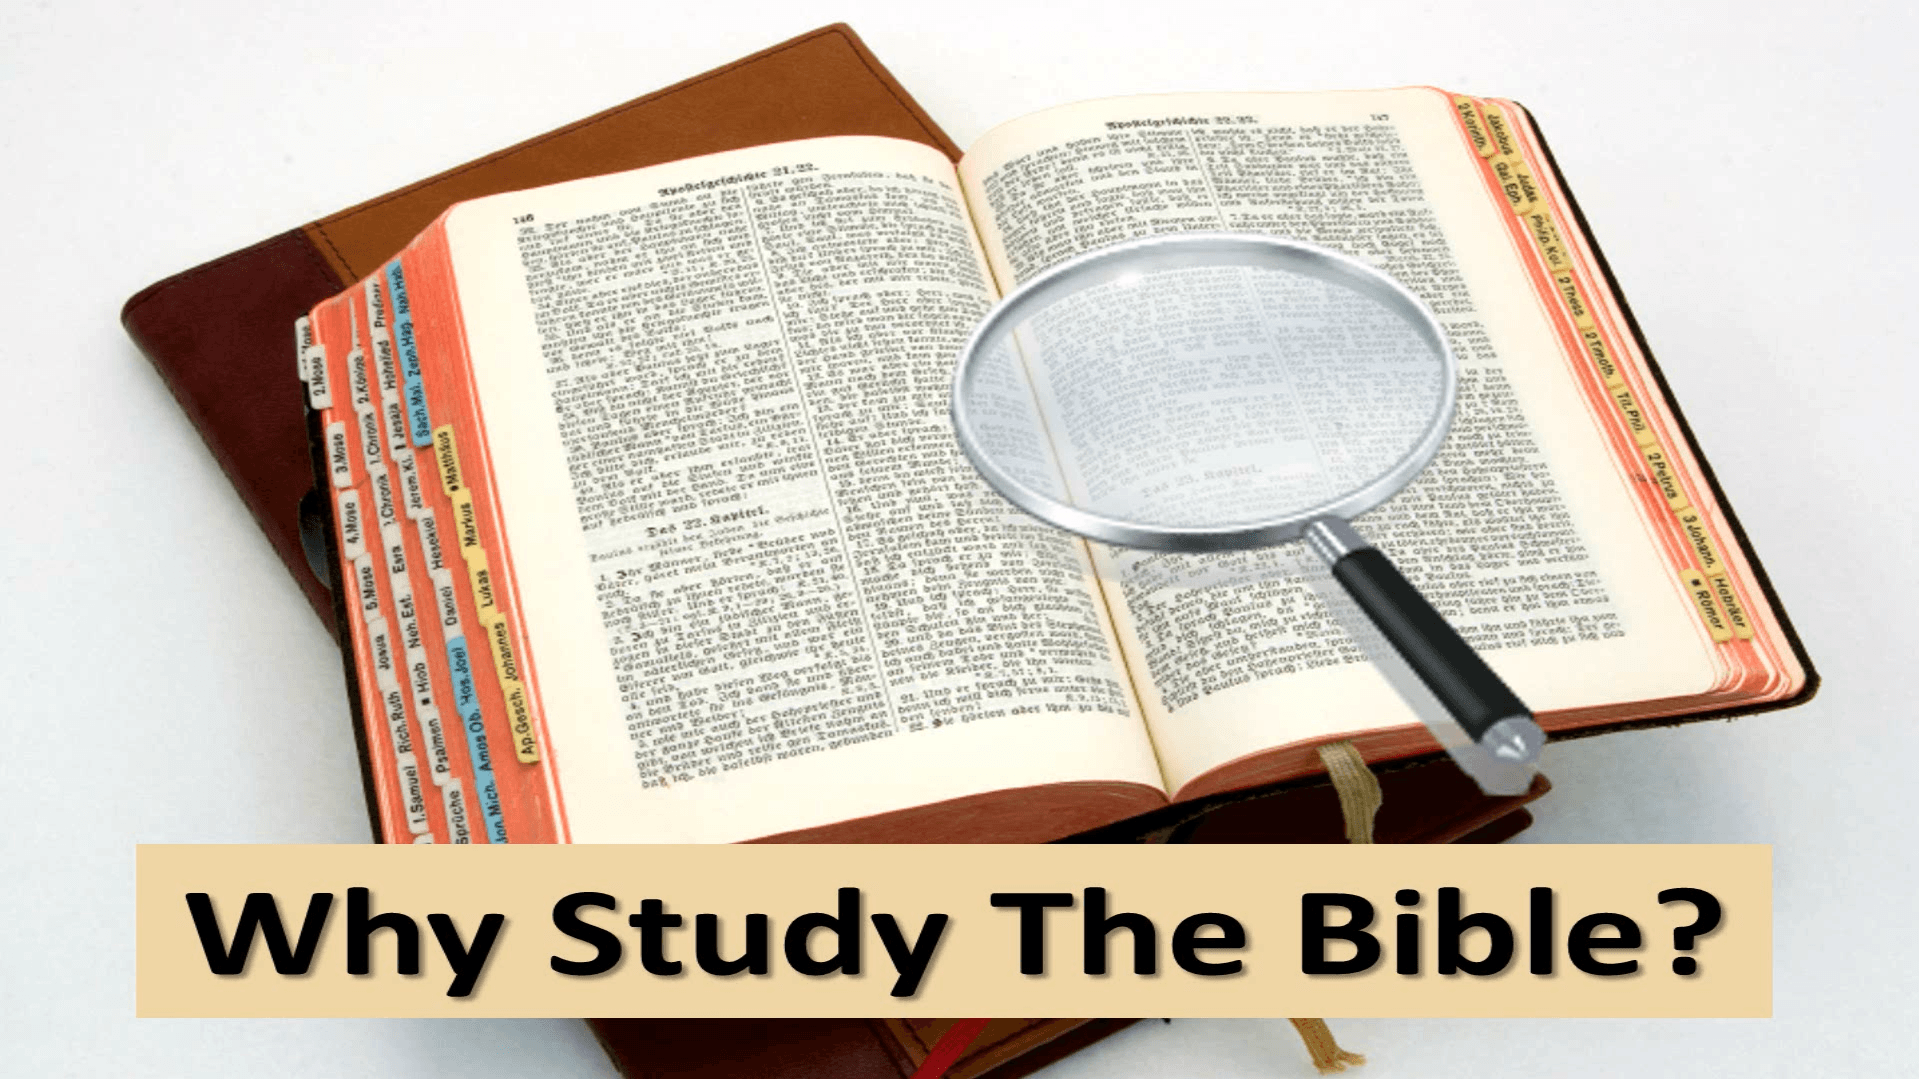 Why Study The Bible?